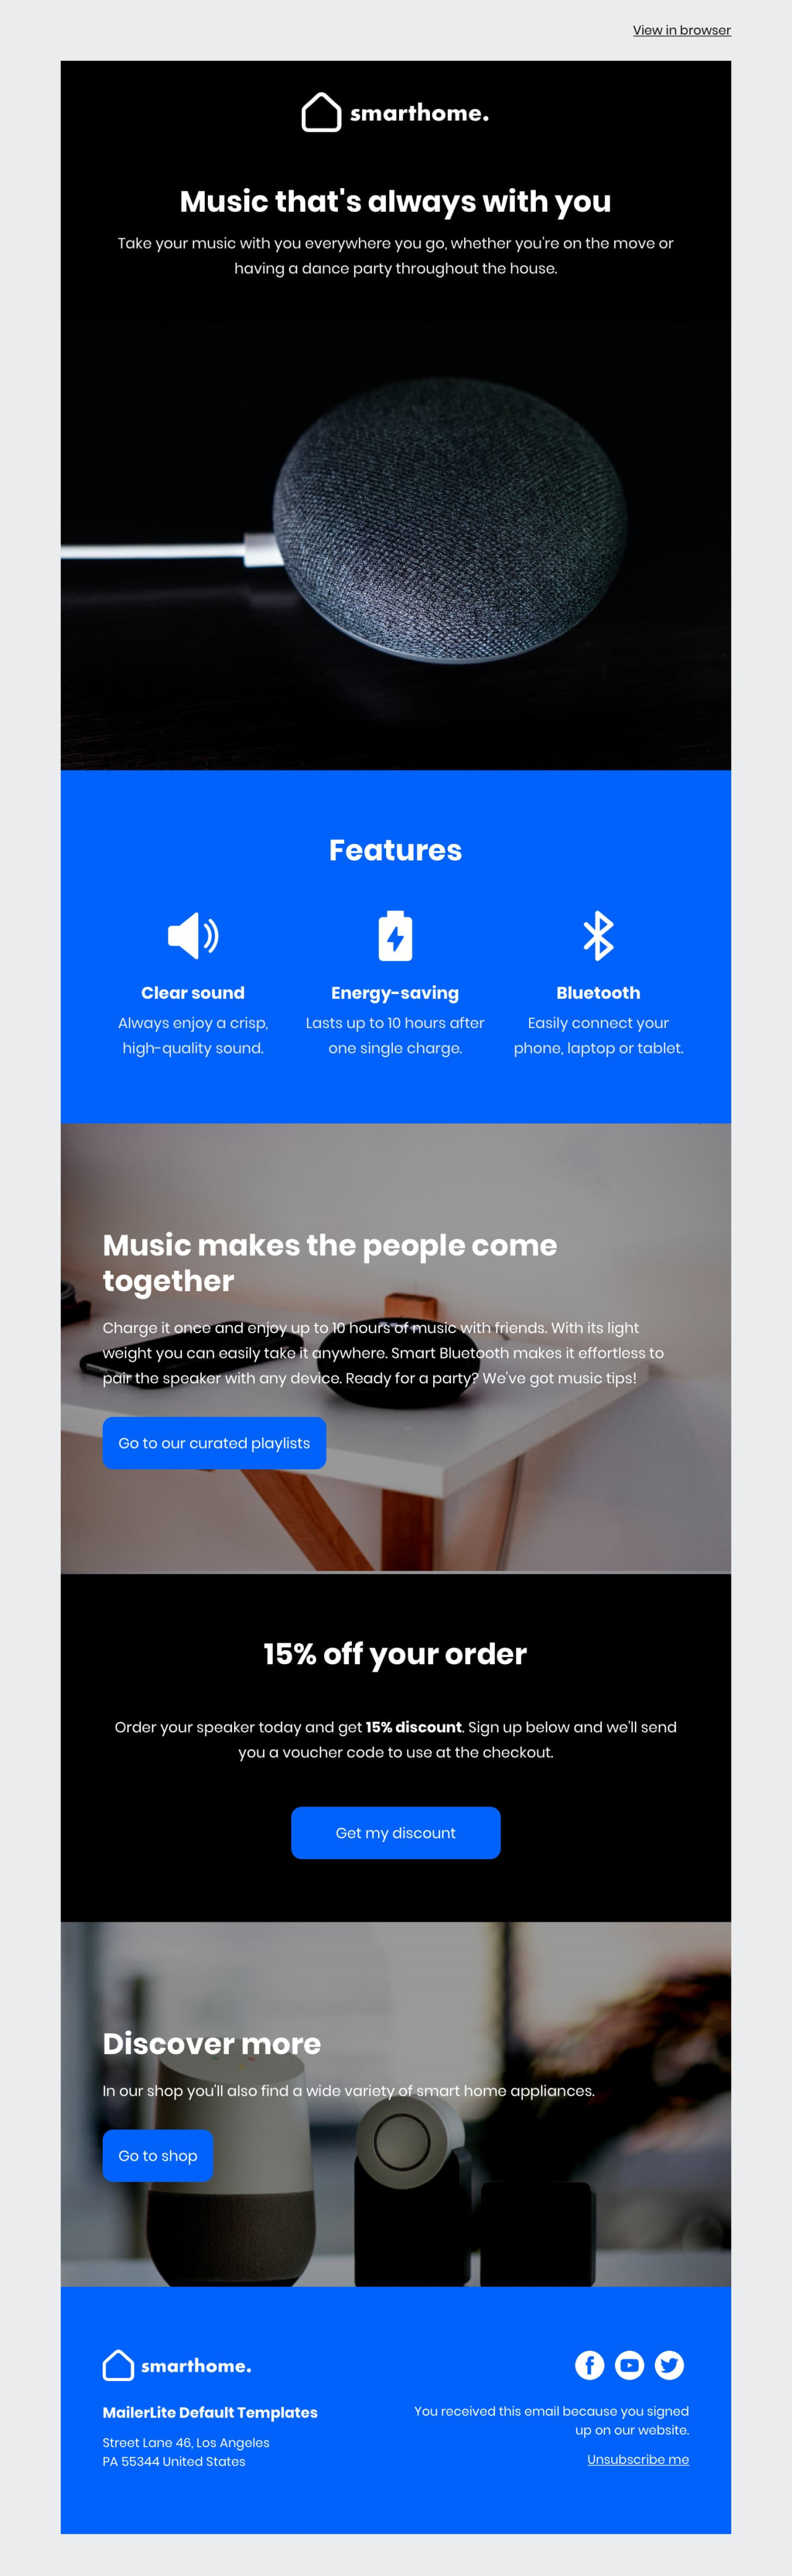 Product promotion template - Made by MailerLite